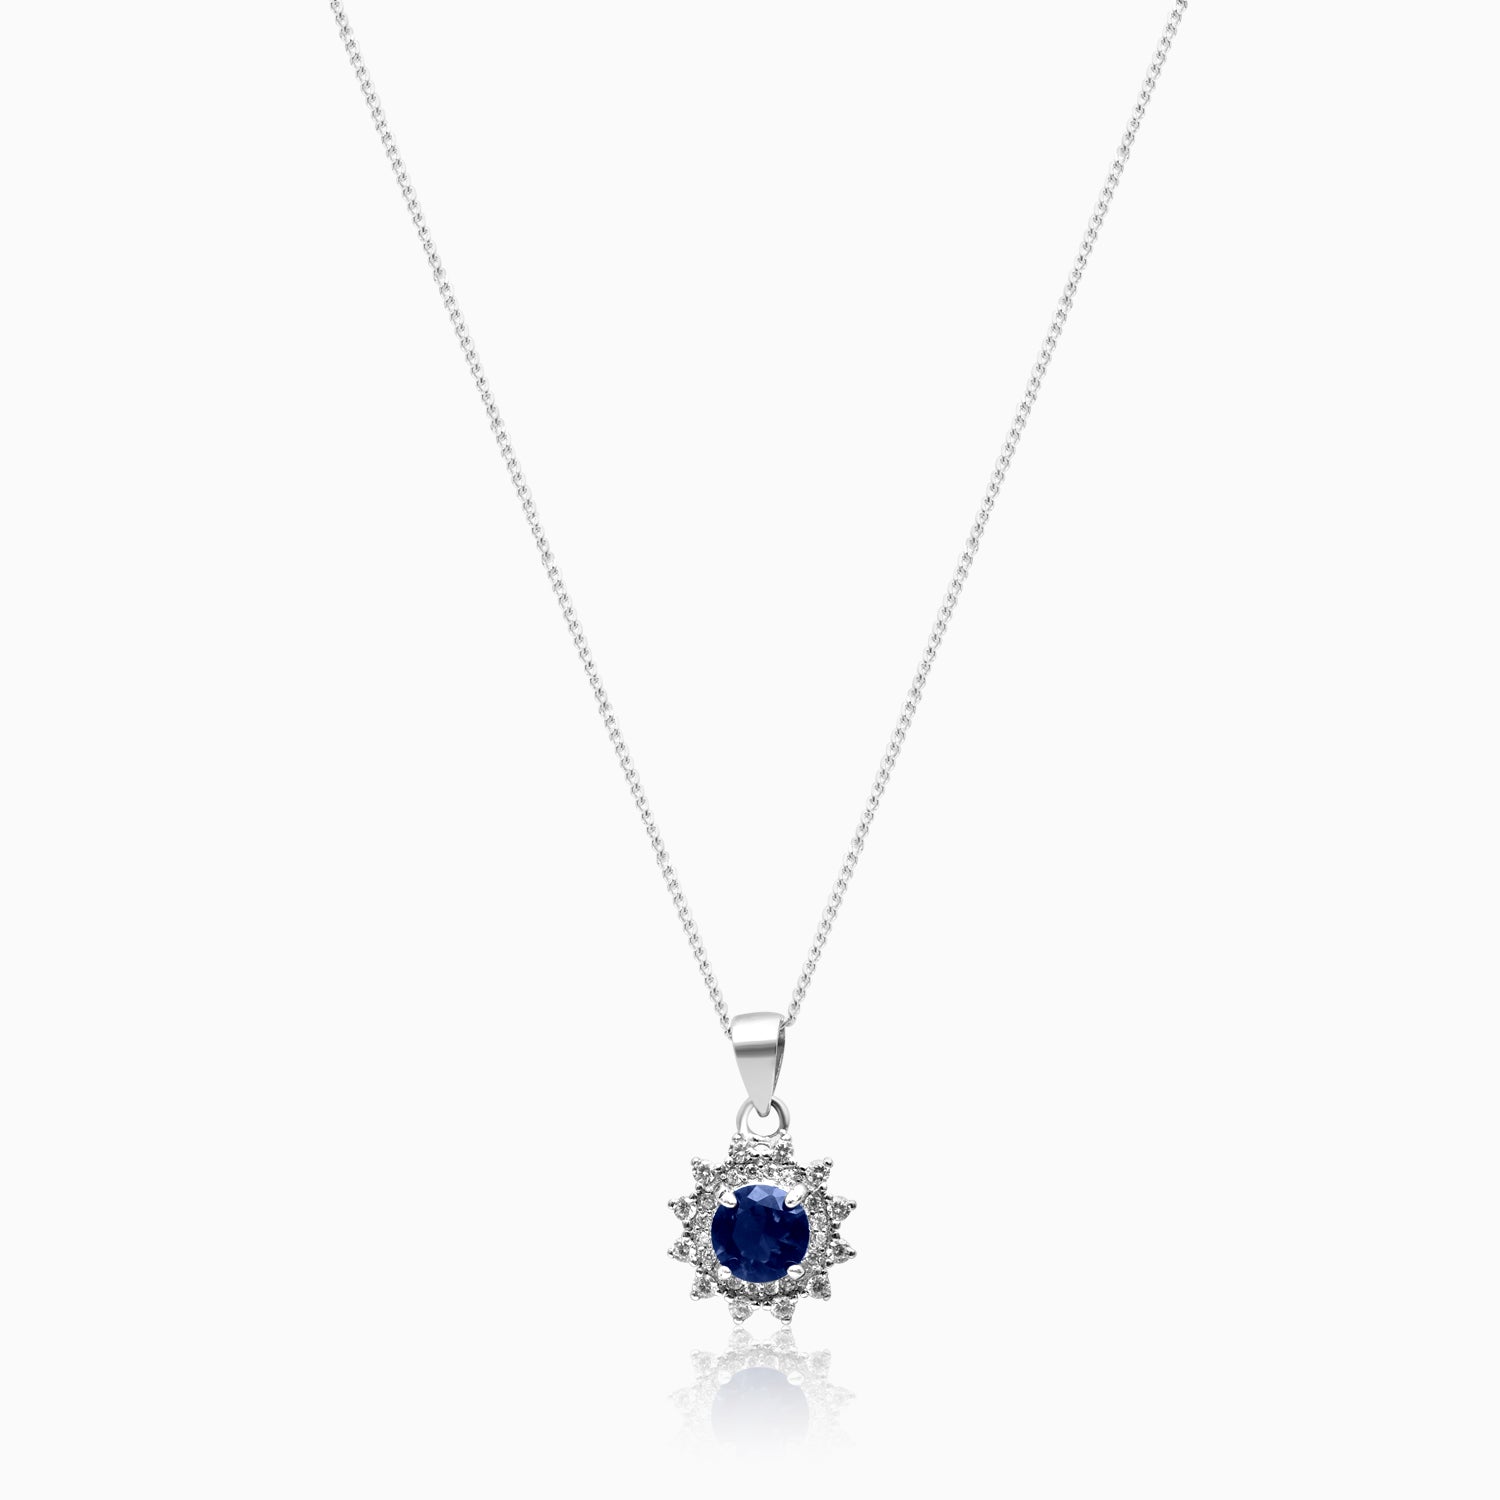 Silver Sparkling Sapphire Blue Pendant with Link Chain